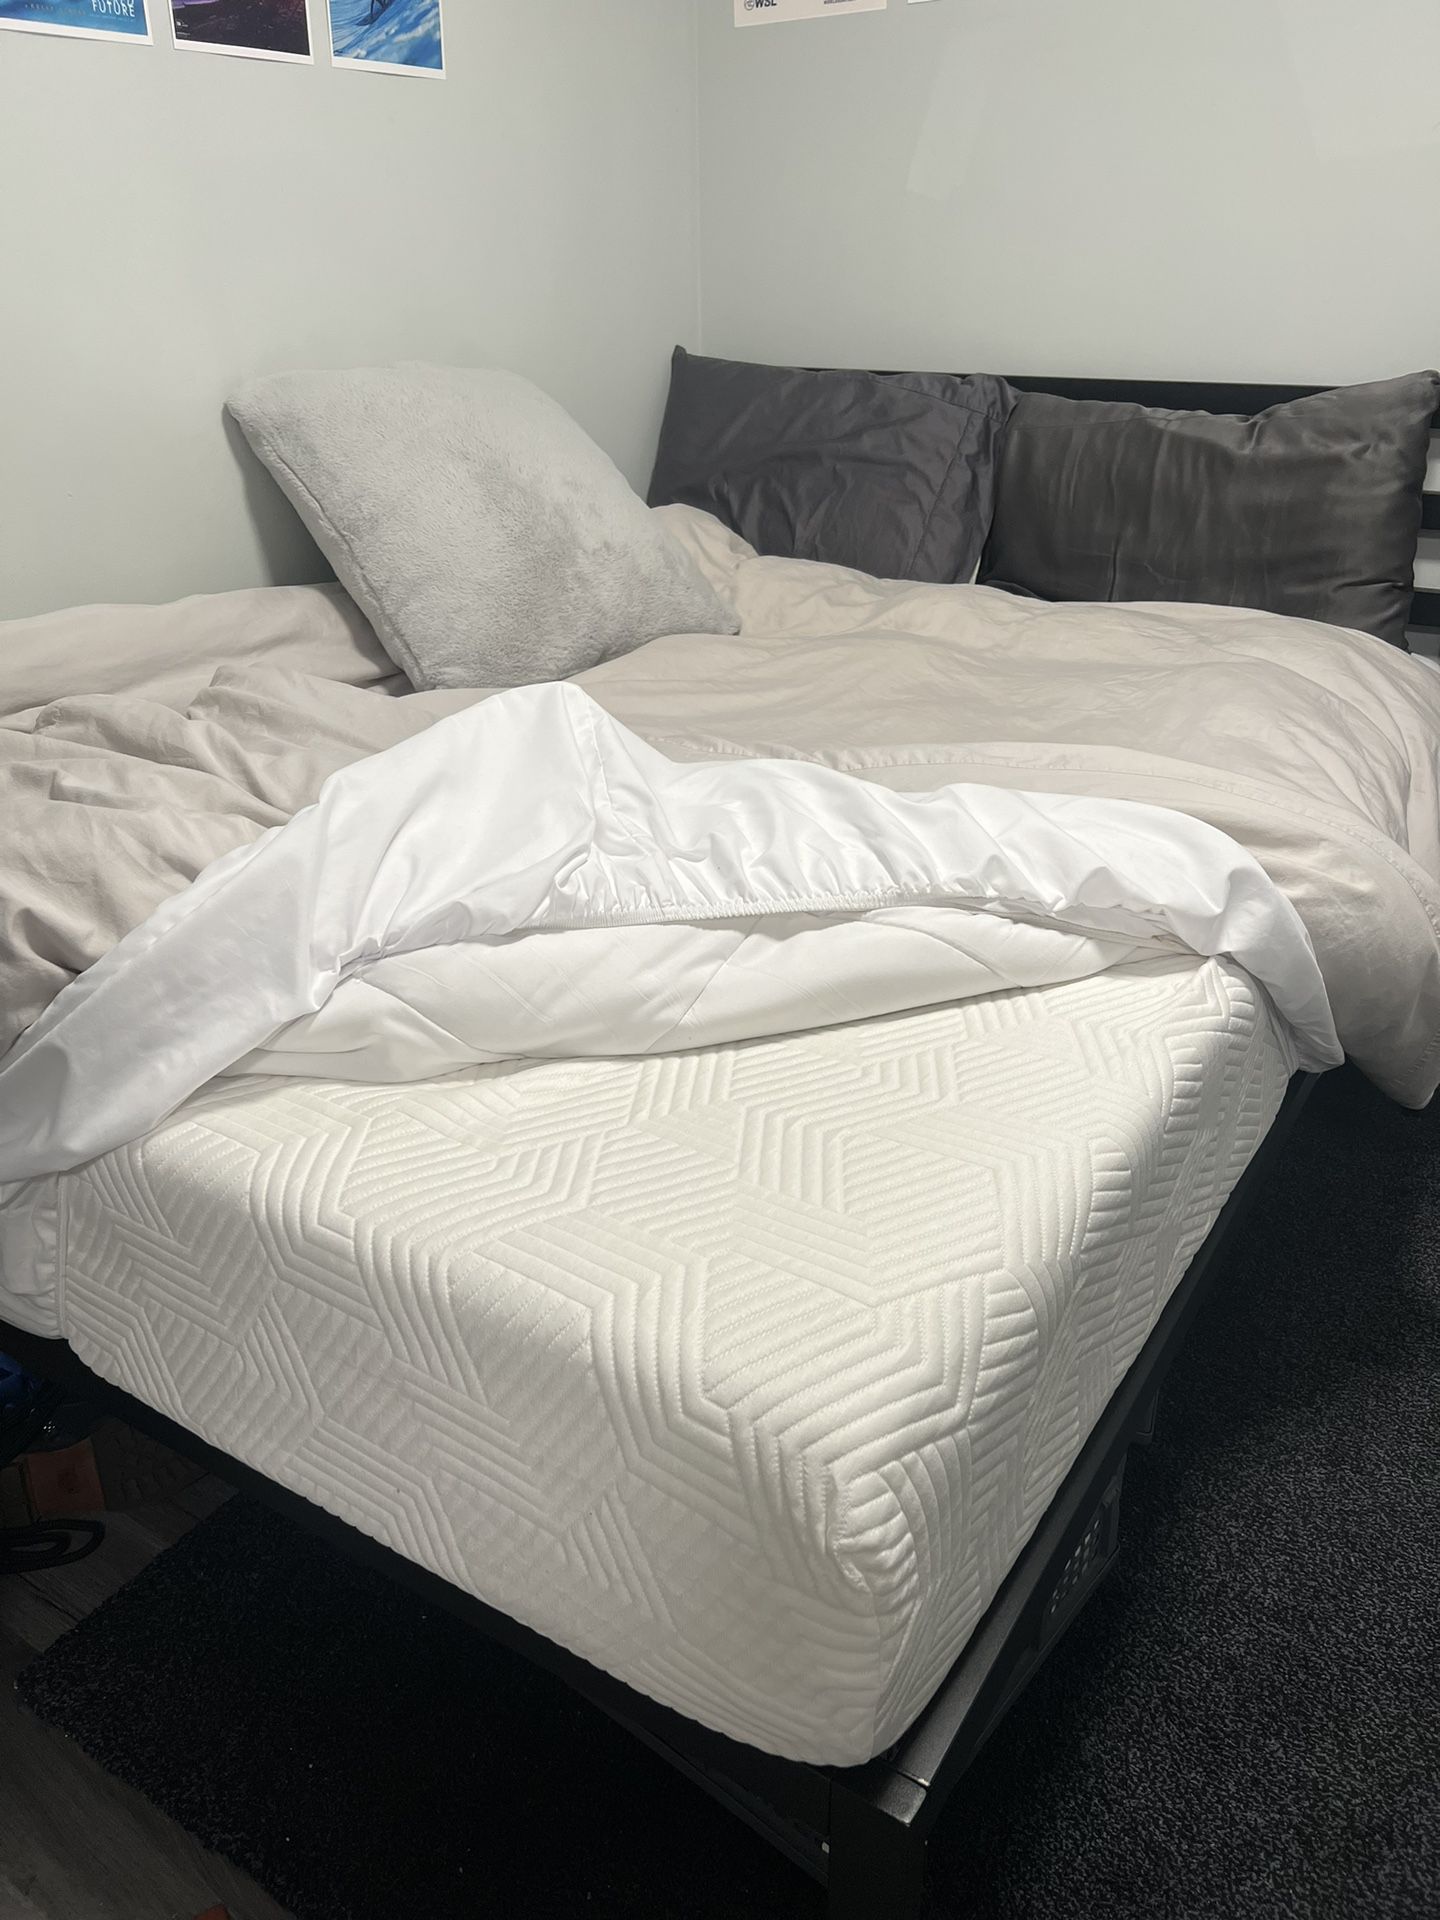 Full Mattress And Bed Frame